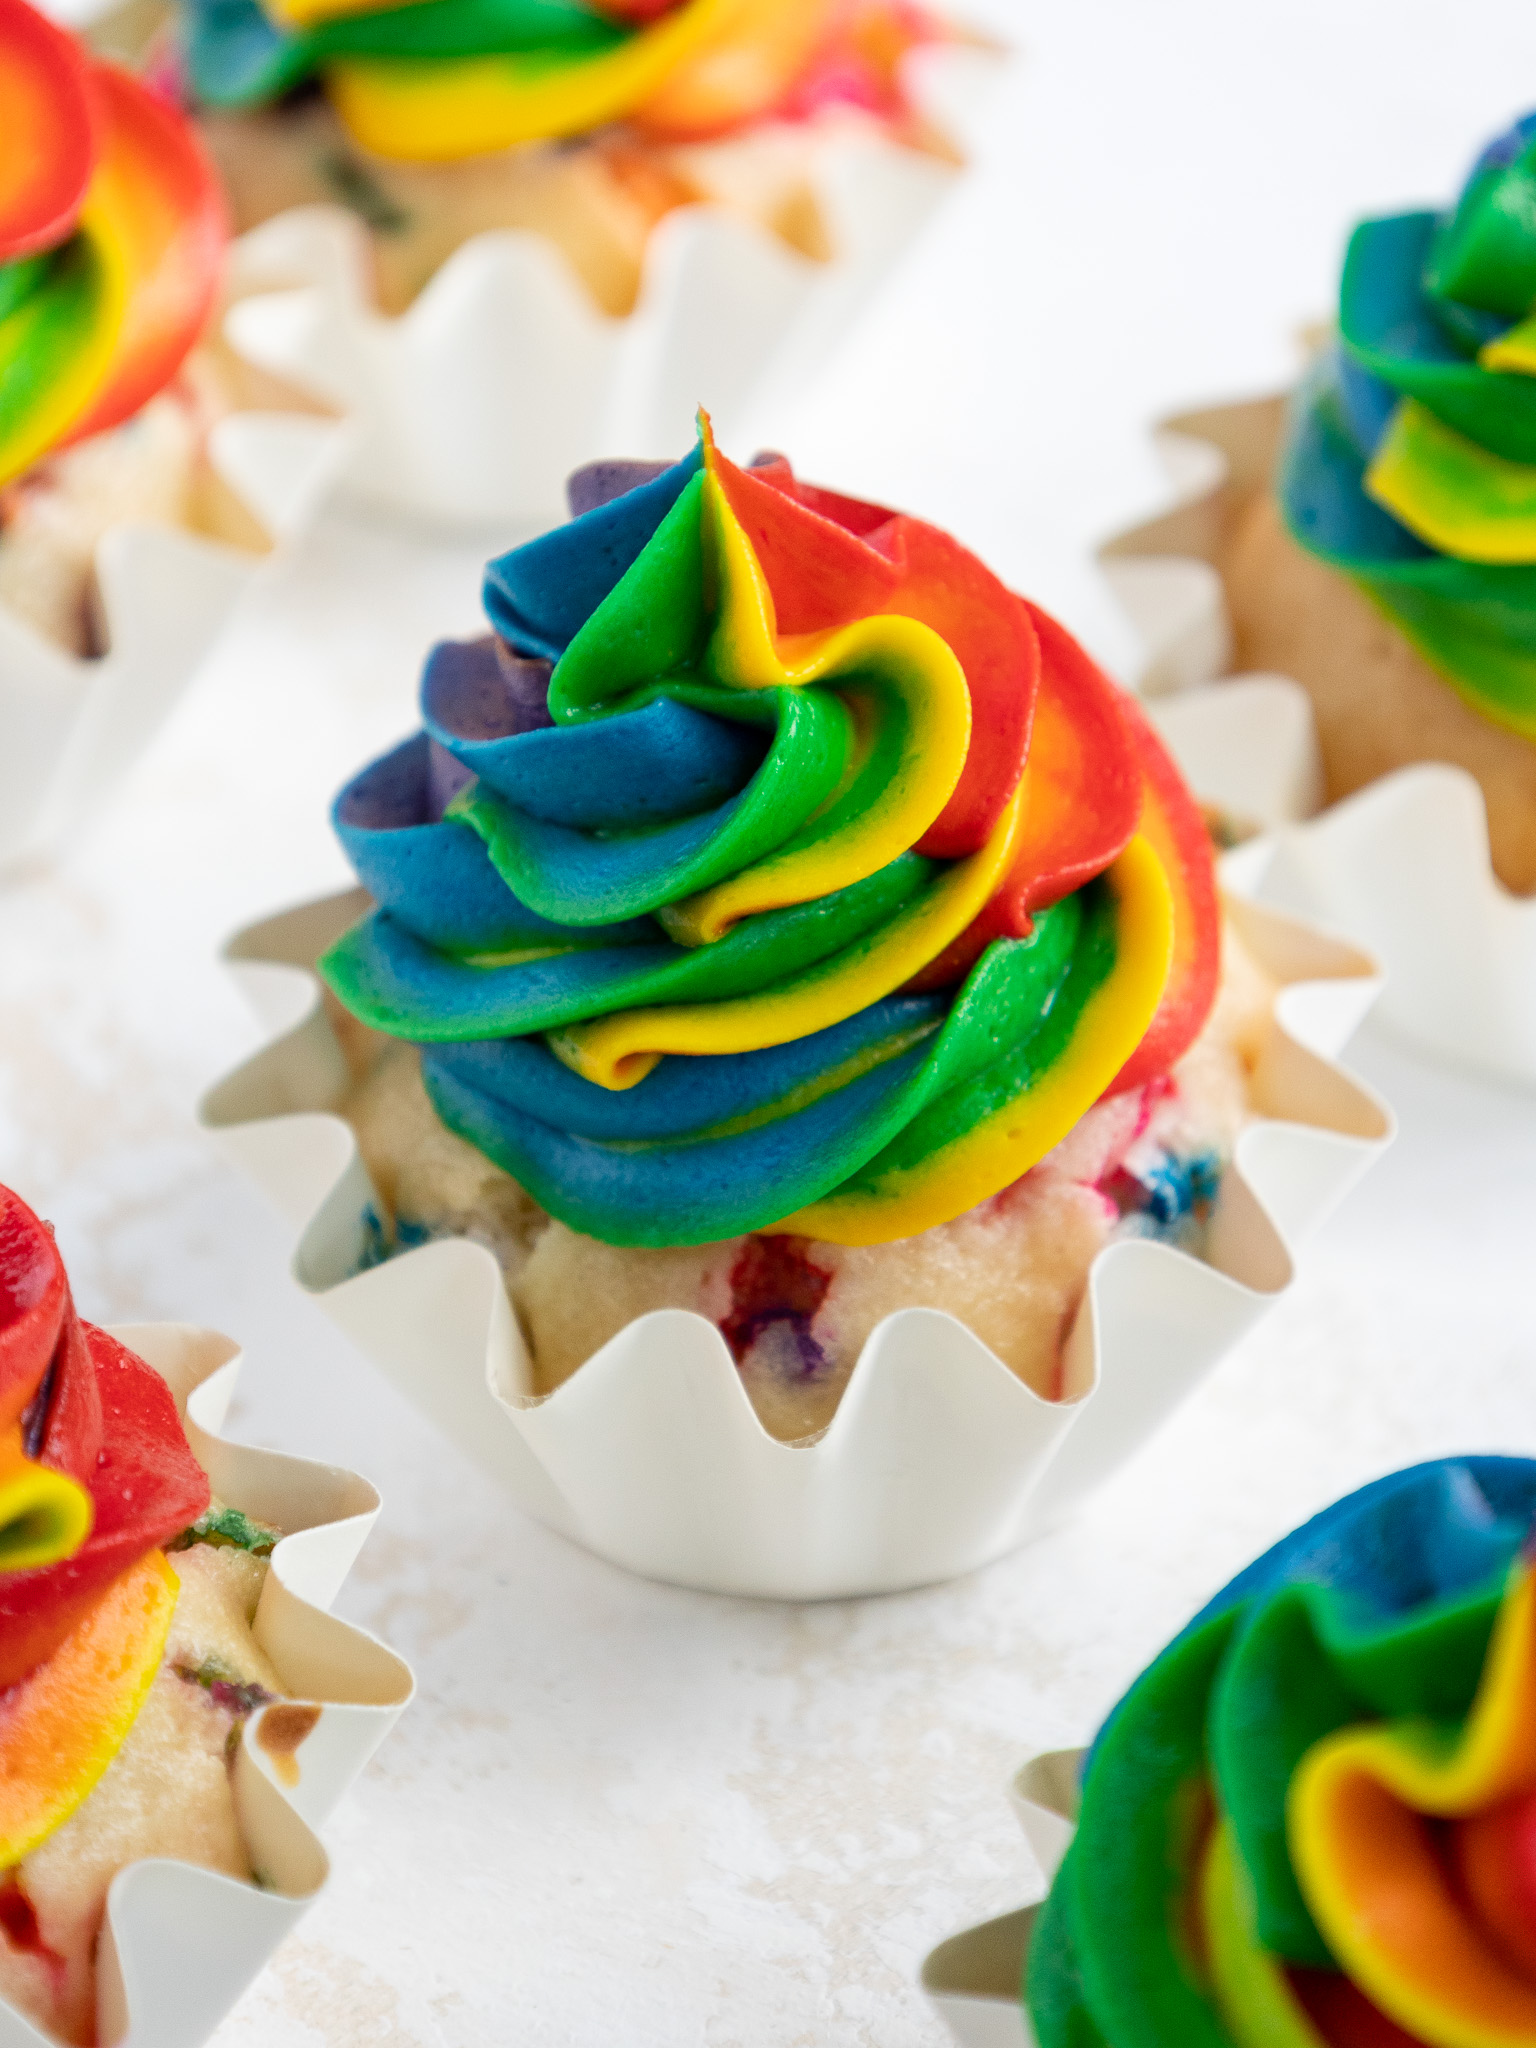 image of a rainbow frosting cupcake surrounded by other cupcakes